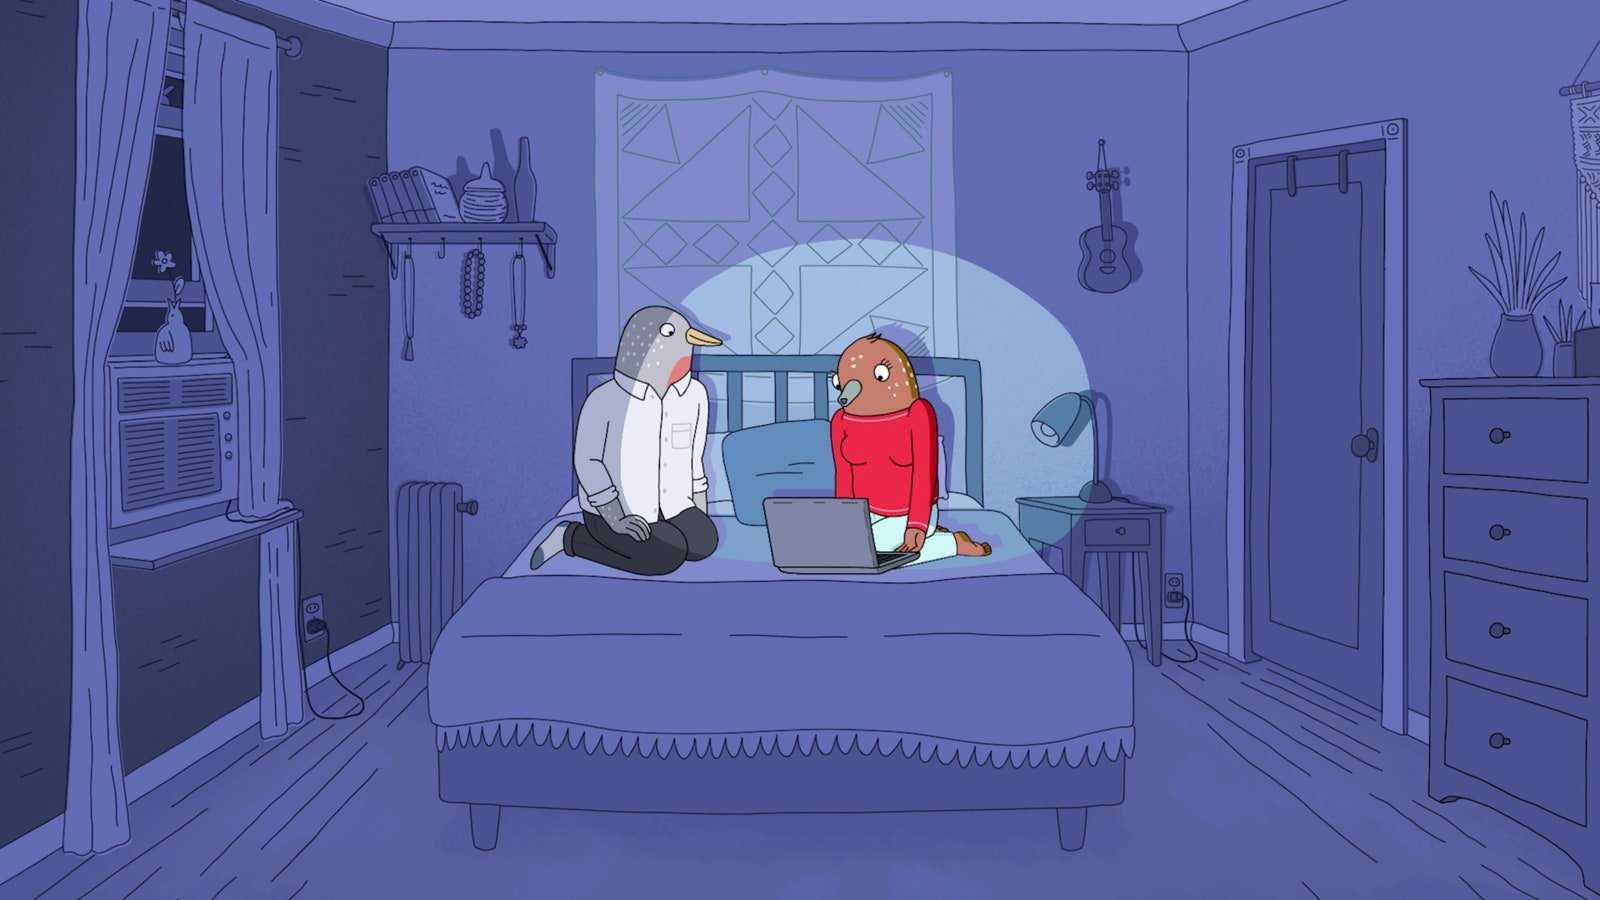 Tuca & Bertie' Review: Finally, an Animated Show About Women, Made